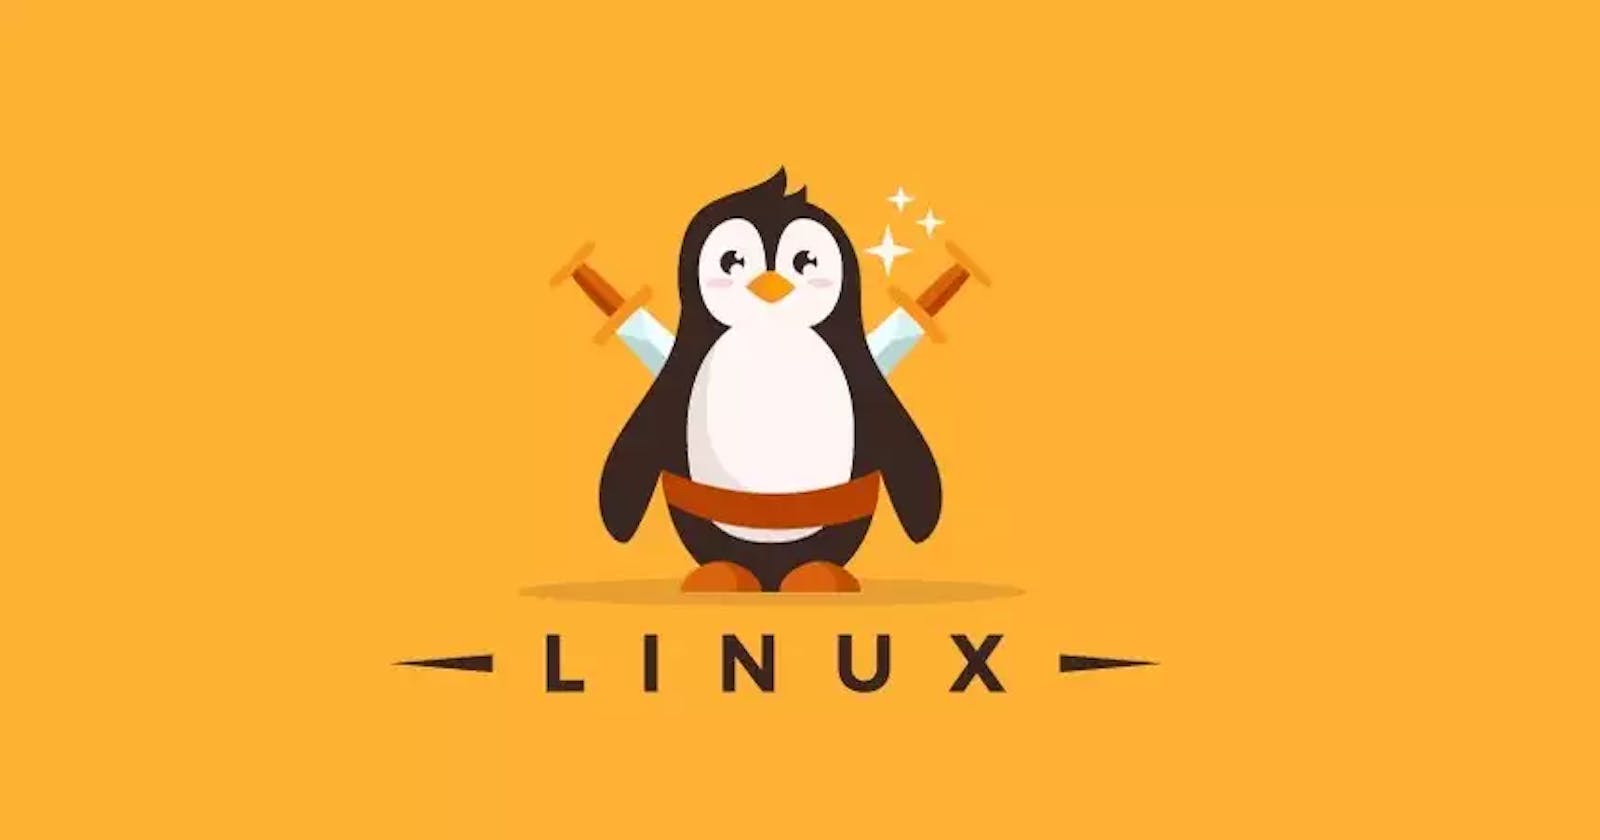 Learning the concepts of Linux